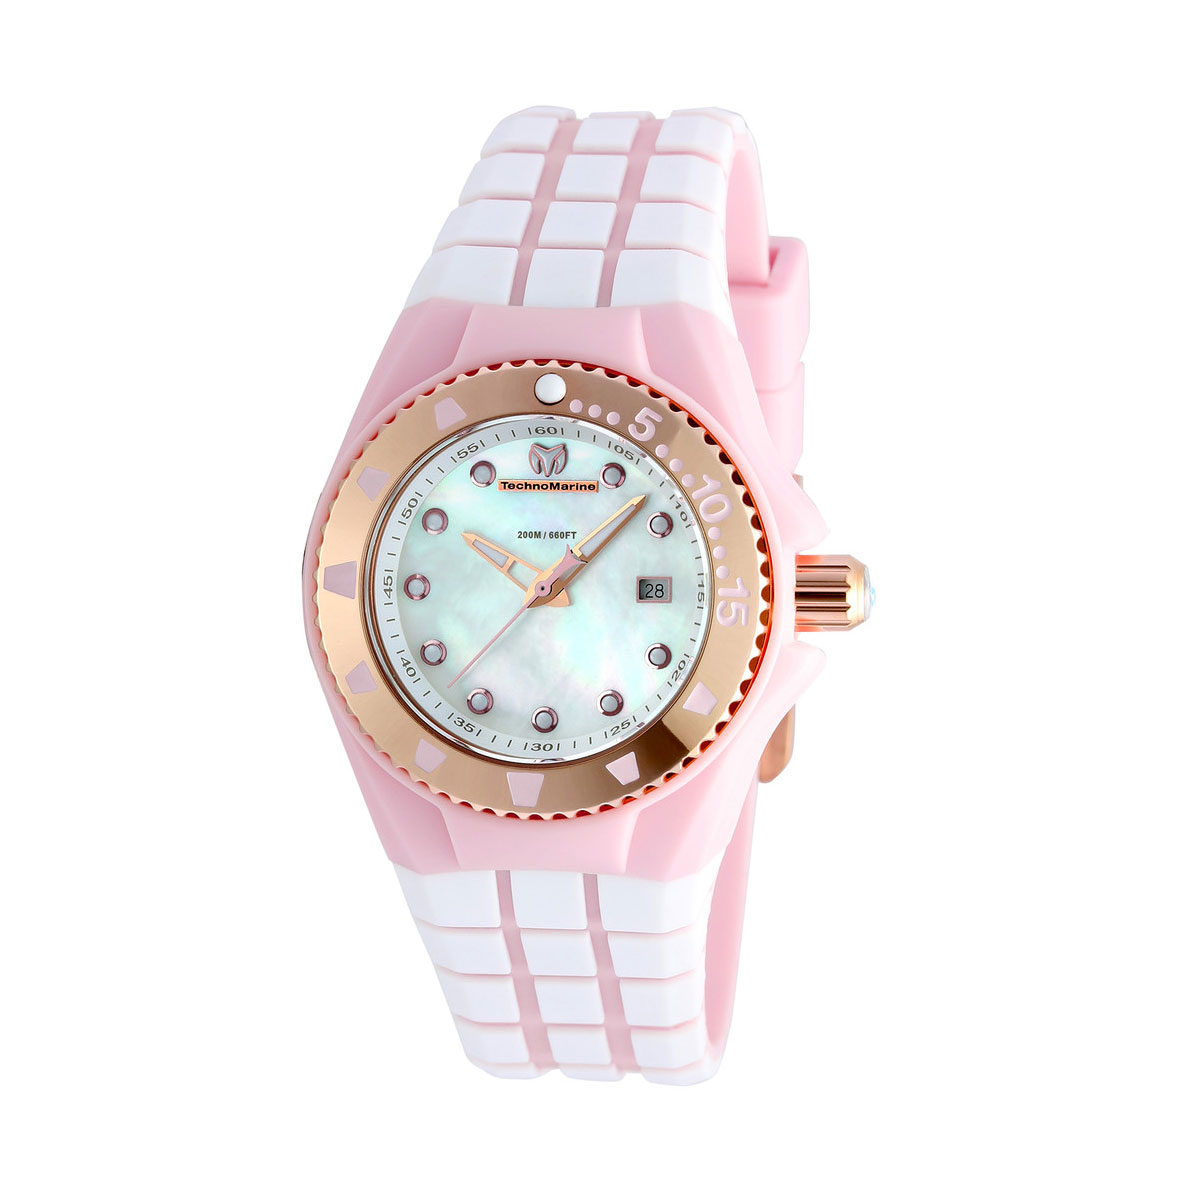 White and pink casual watch